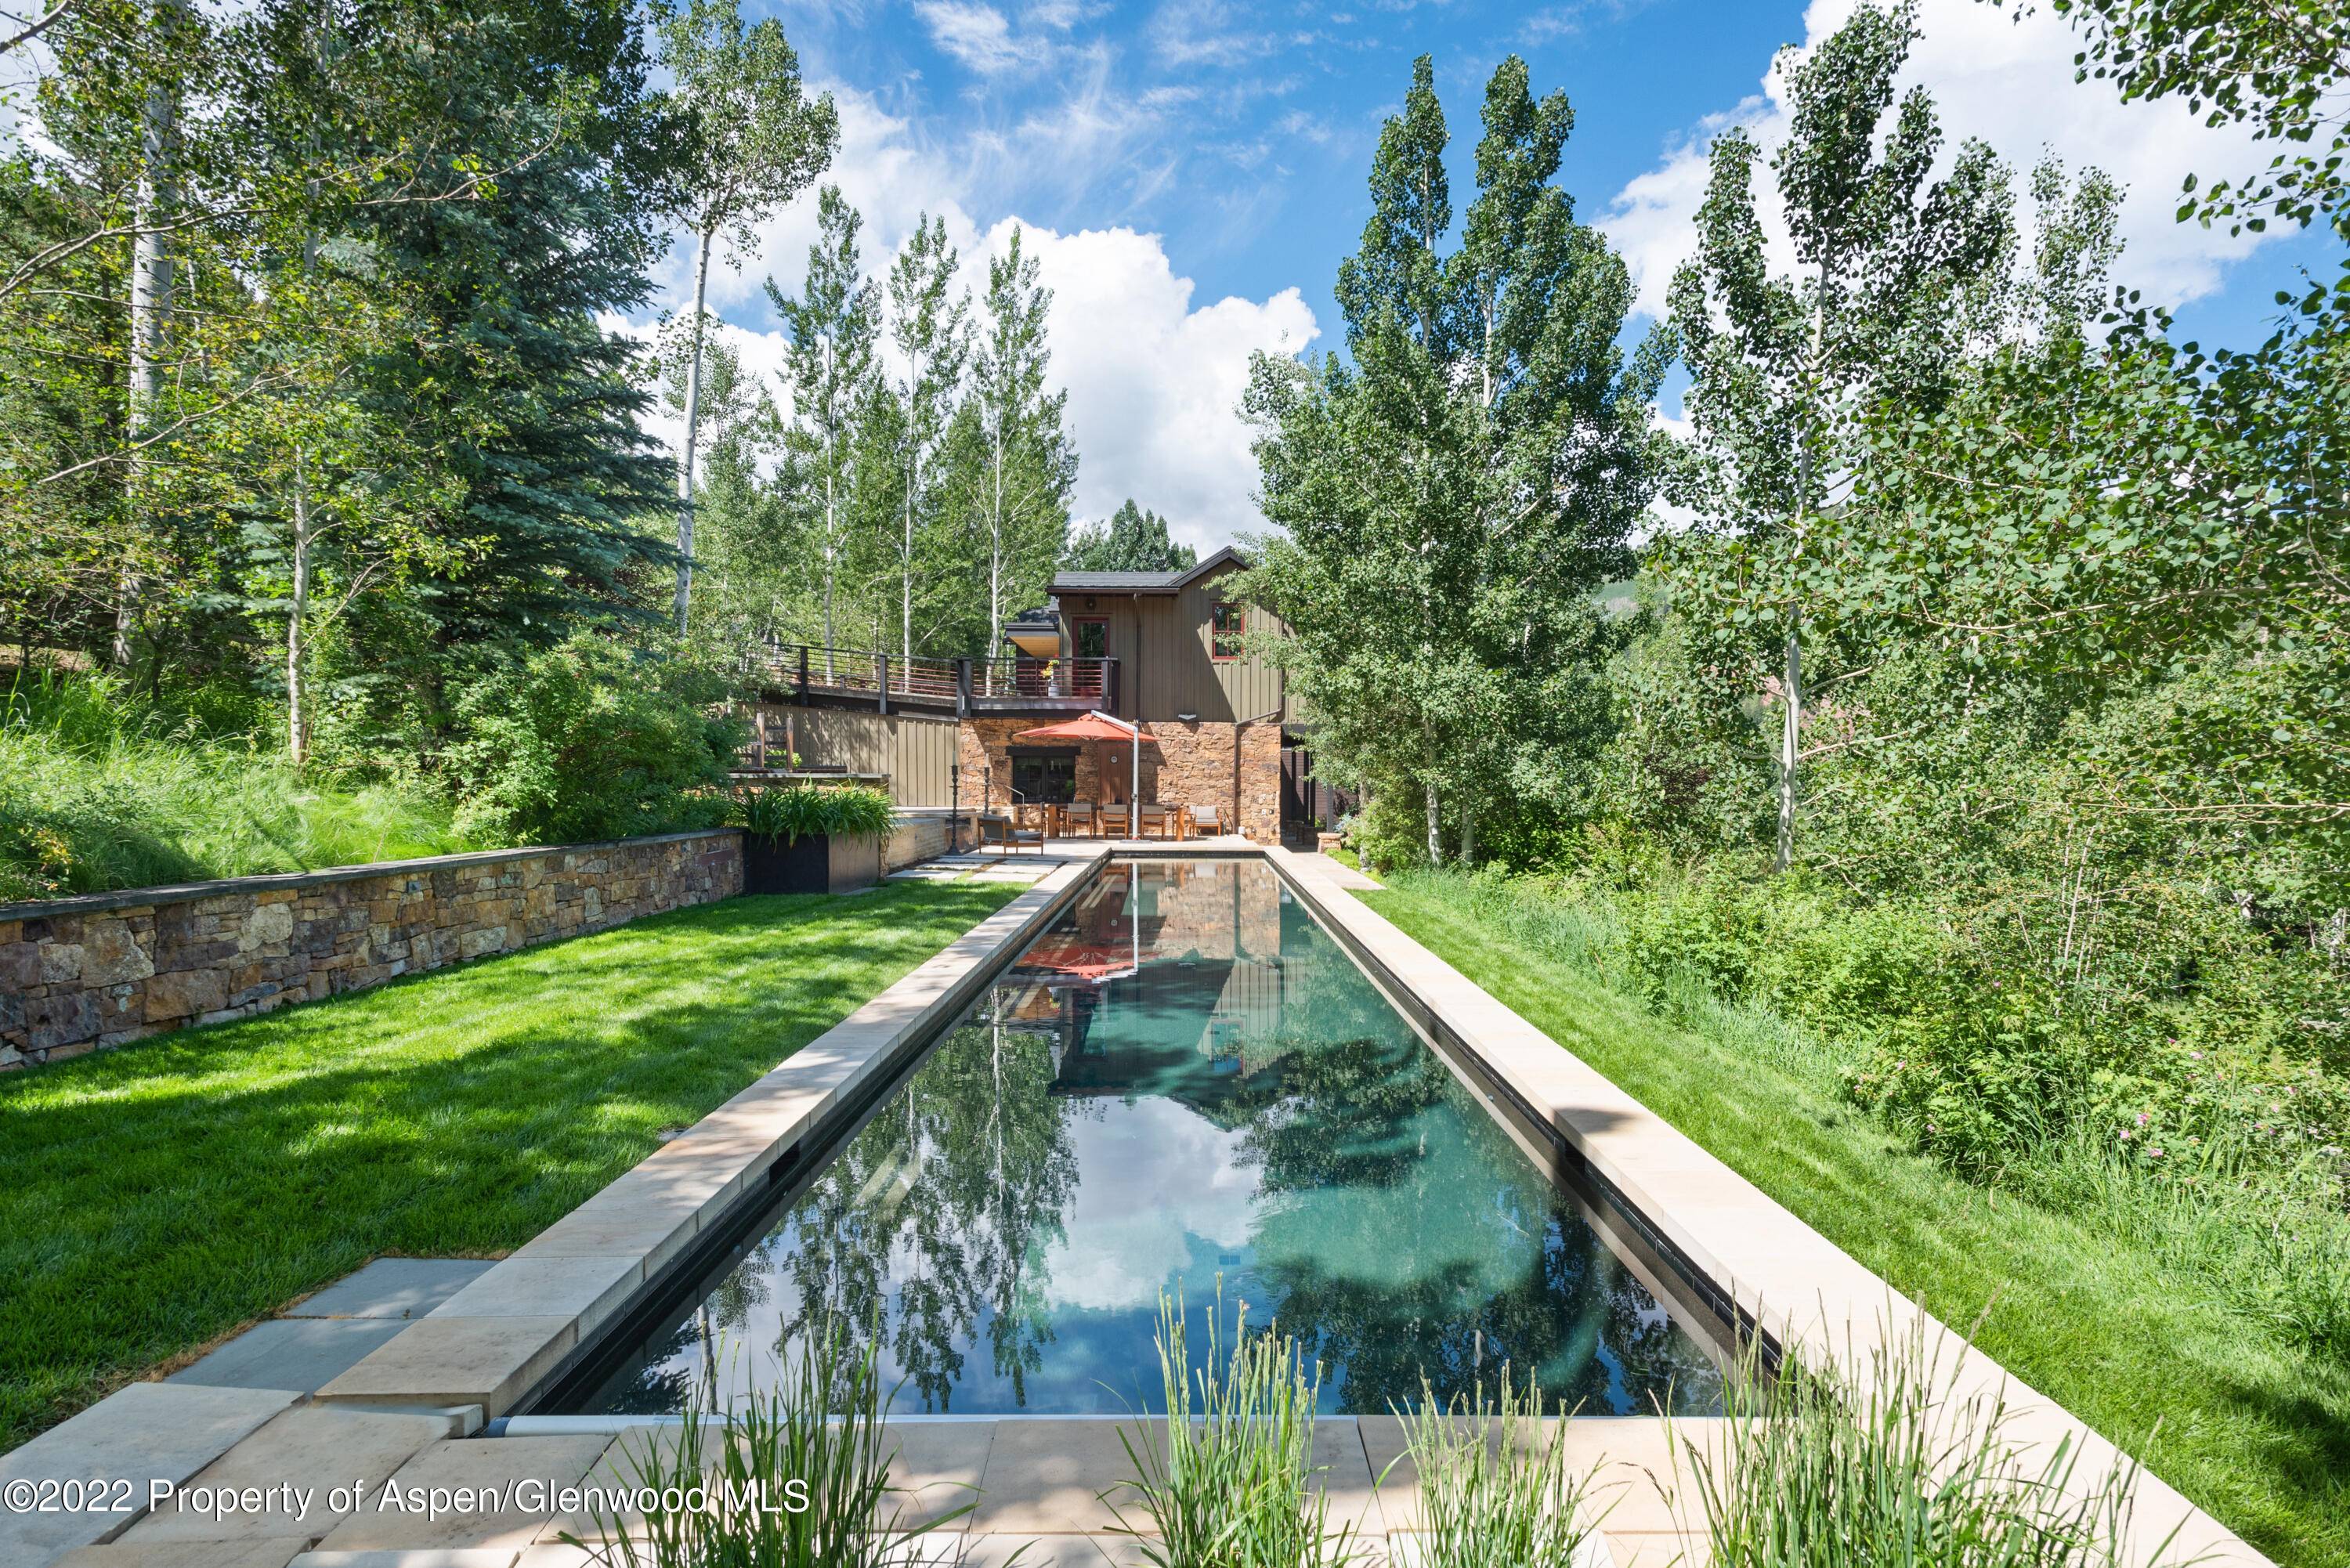 On one of the most desirable lots in highly coveted Five Trees, this extraordinary mountain contemporary estate sits on an acre parcel overlooking the Aspen valley.